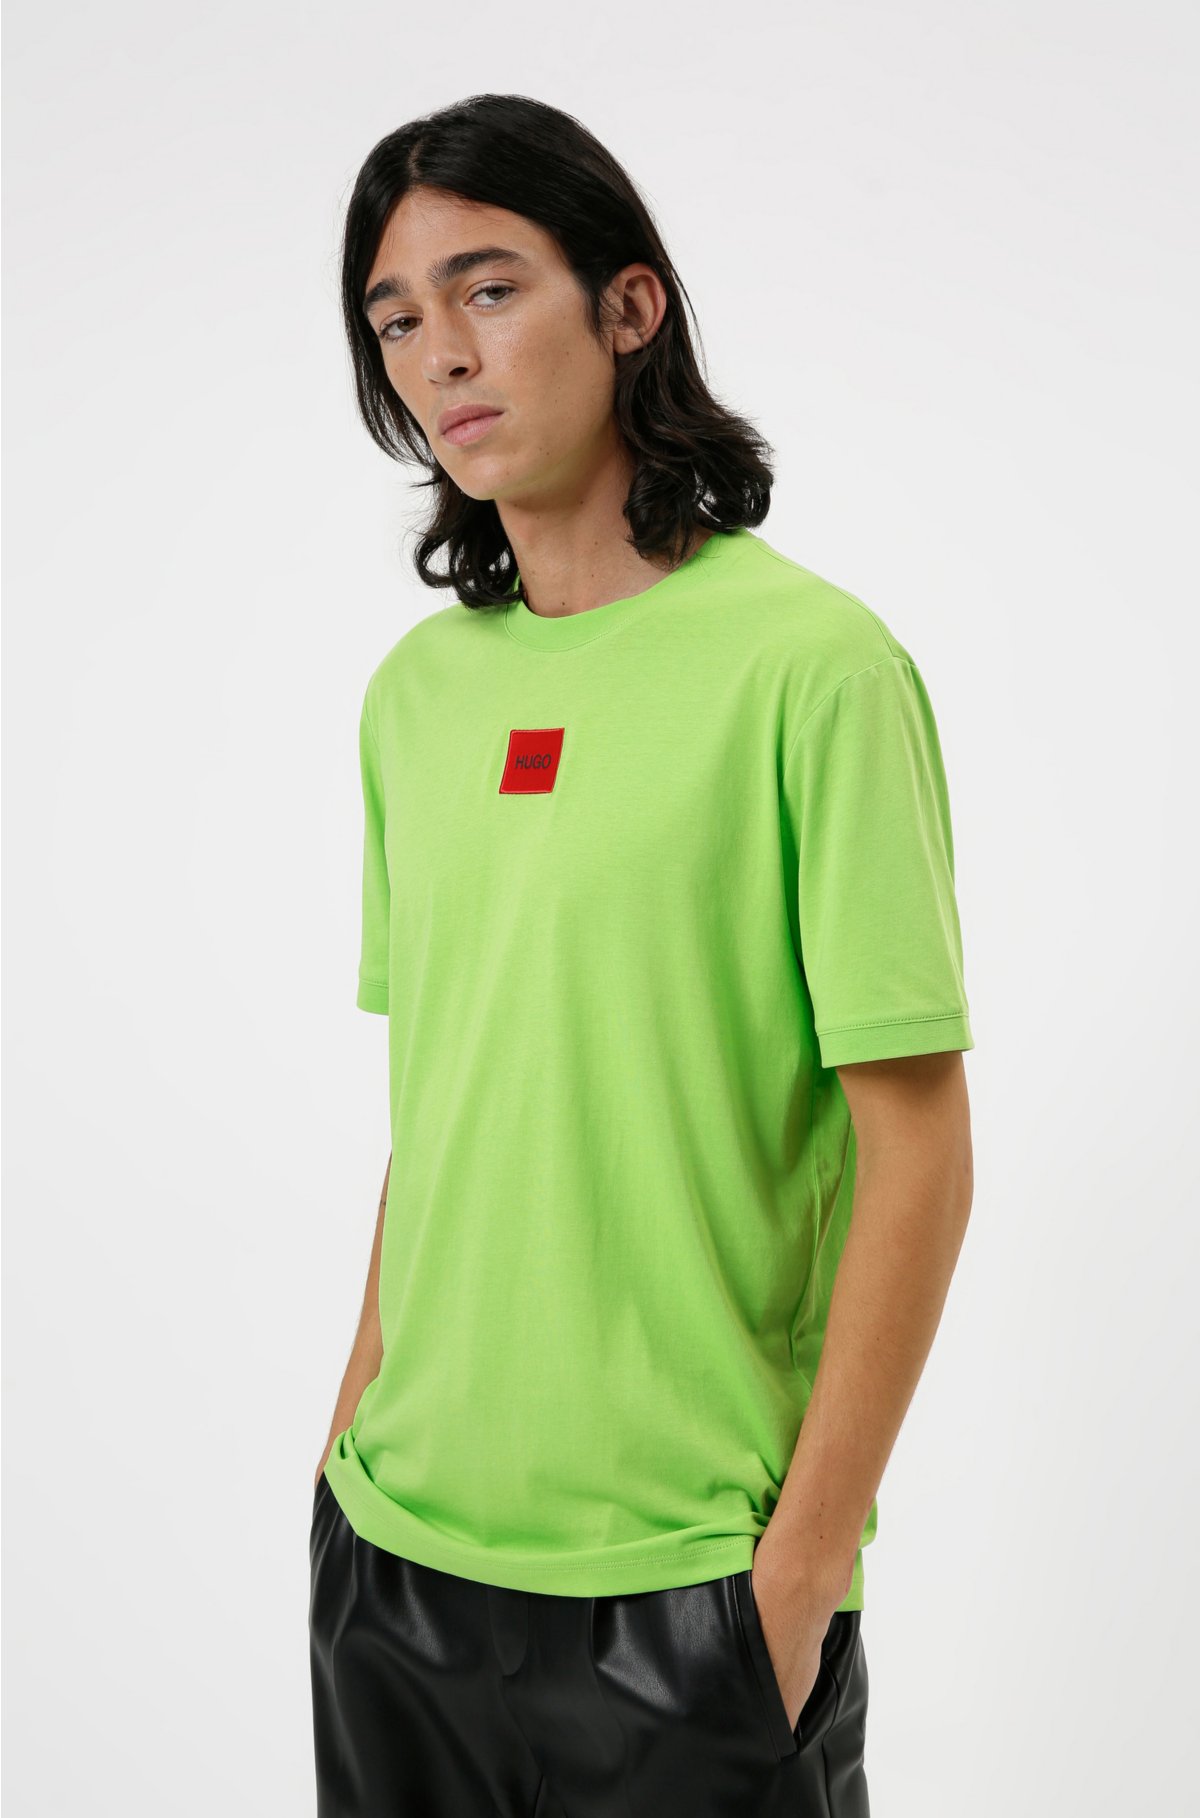 HUGO - Cotton-jersey T-shirt with logo label